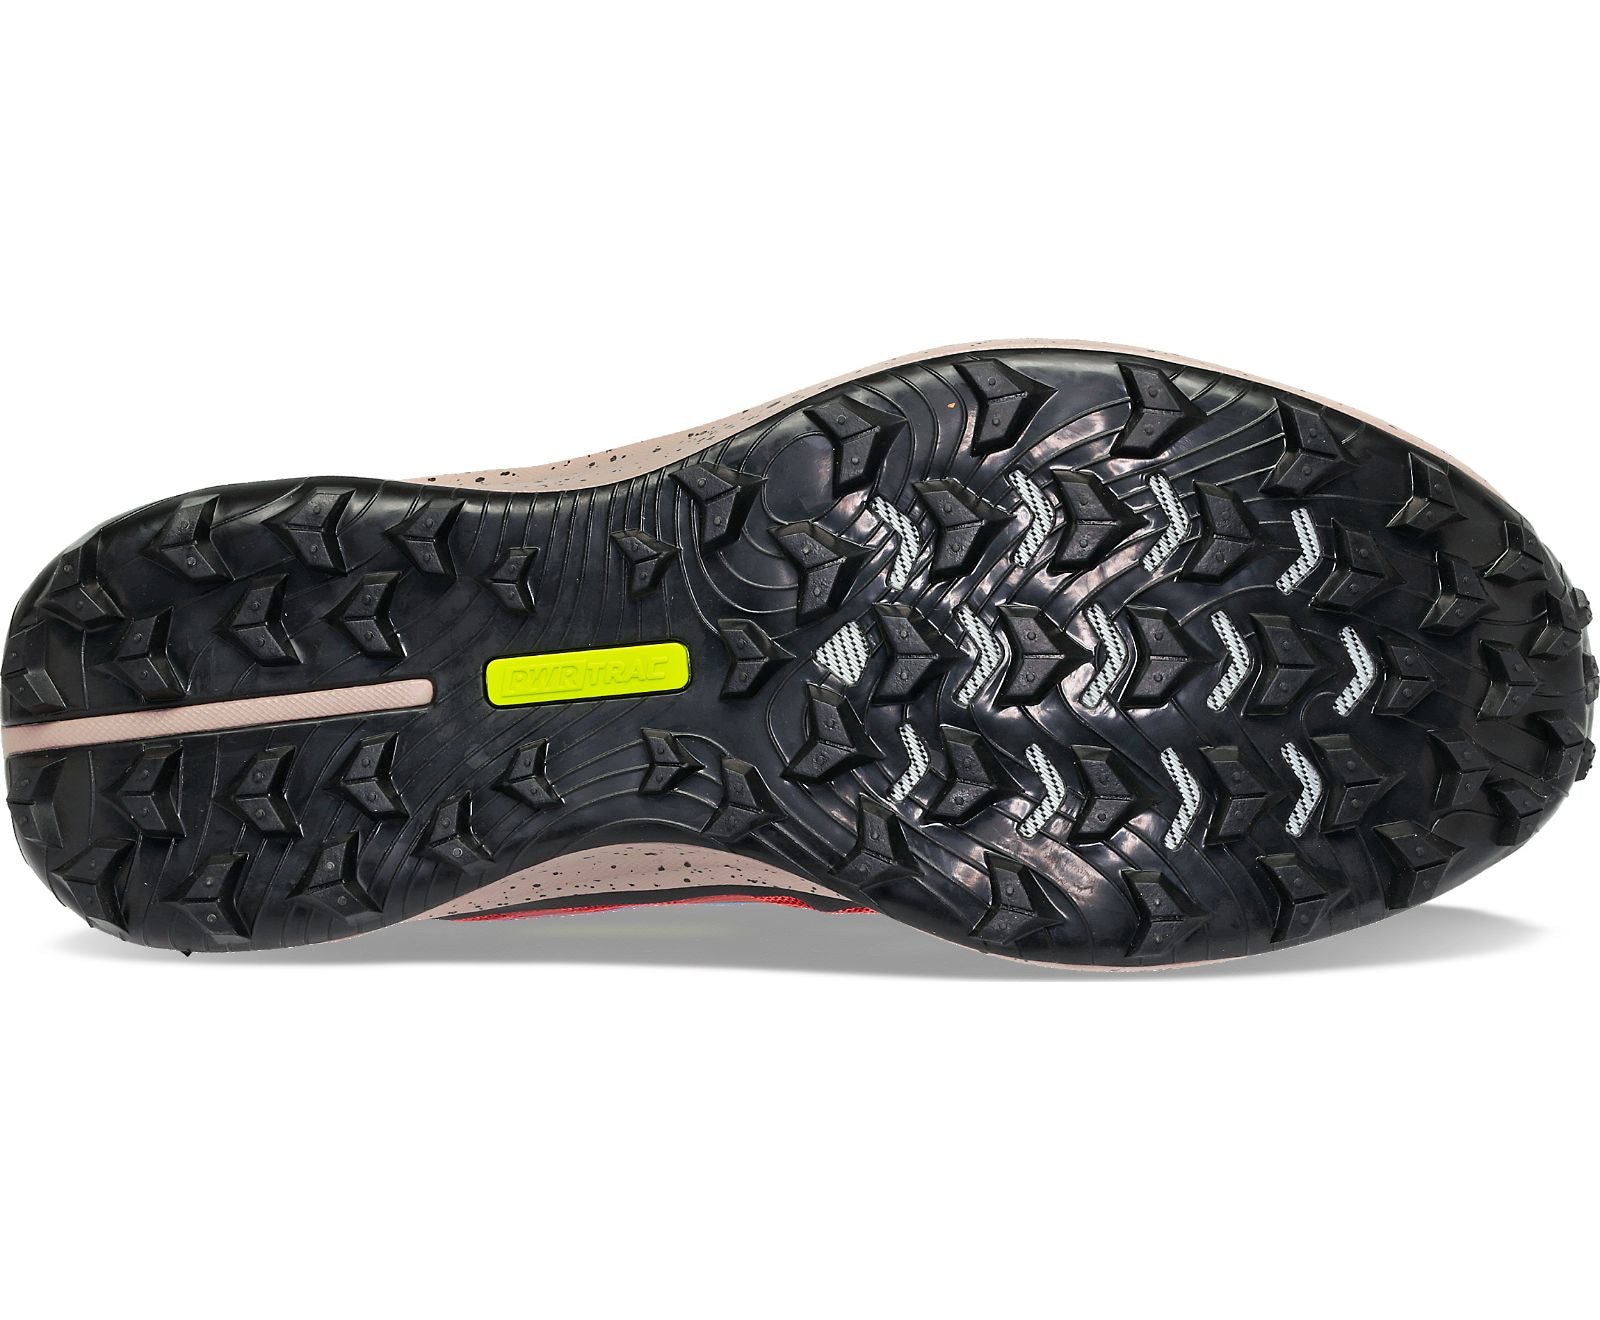 Bottom (outer sole) view of the Men's Peregrine 12 trail shoe by Saucony in the color Clay/Loam